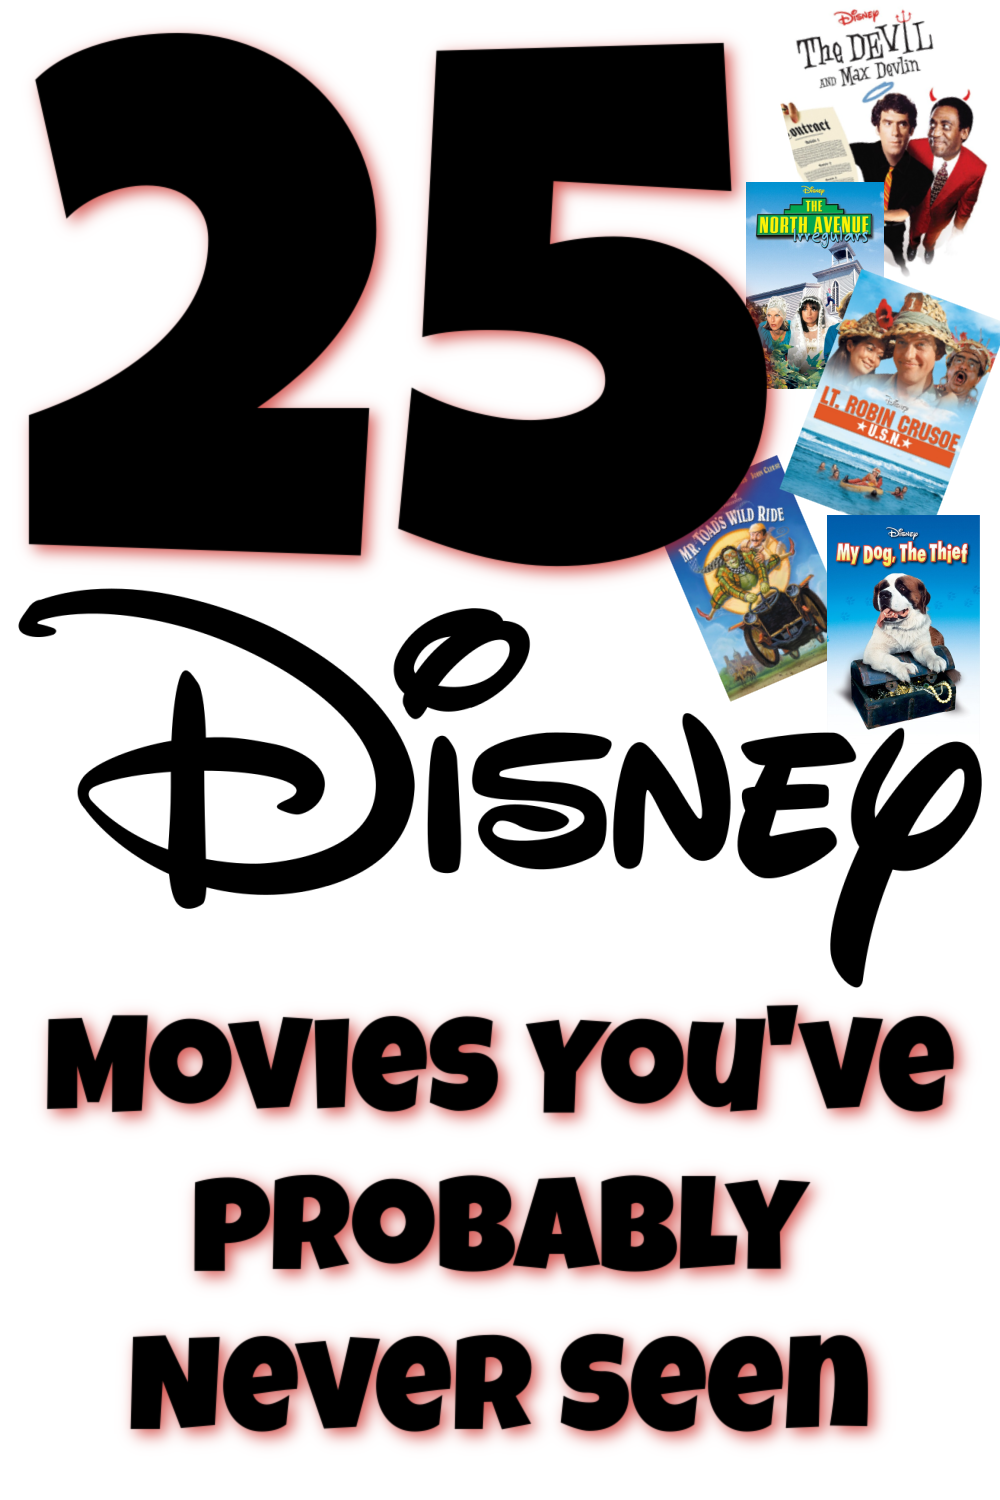 an image showing the following Disney DVD covers: The Devil and Max Devlin, The North Avenue Irregulars, Lt. Robin Crusoe U.S.N. , Mr. Toad's Wild Ride, and My Dog, the Thief, with a text overly that says, "25 Disney Movies You've Probably Never Heard Of"